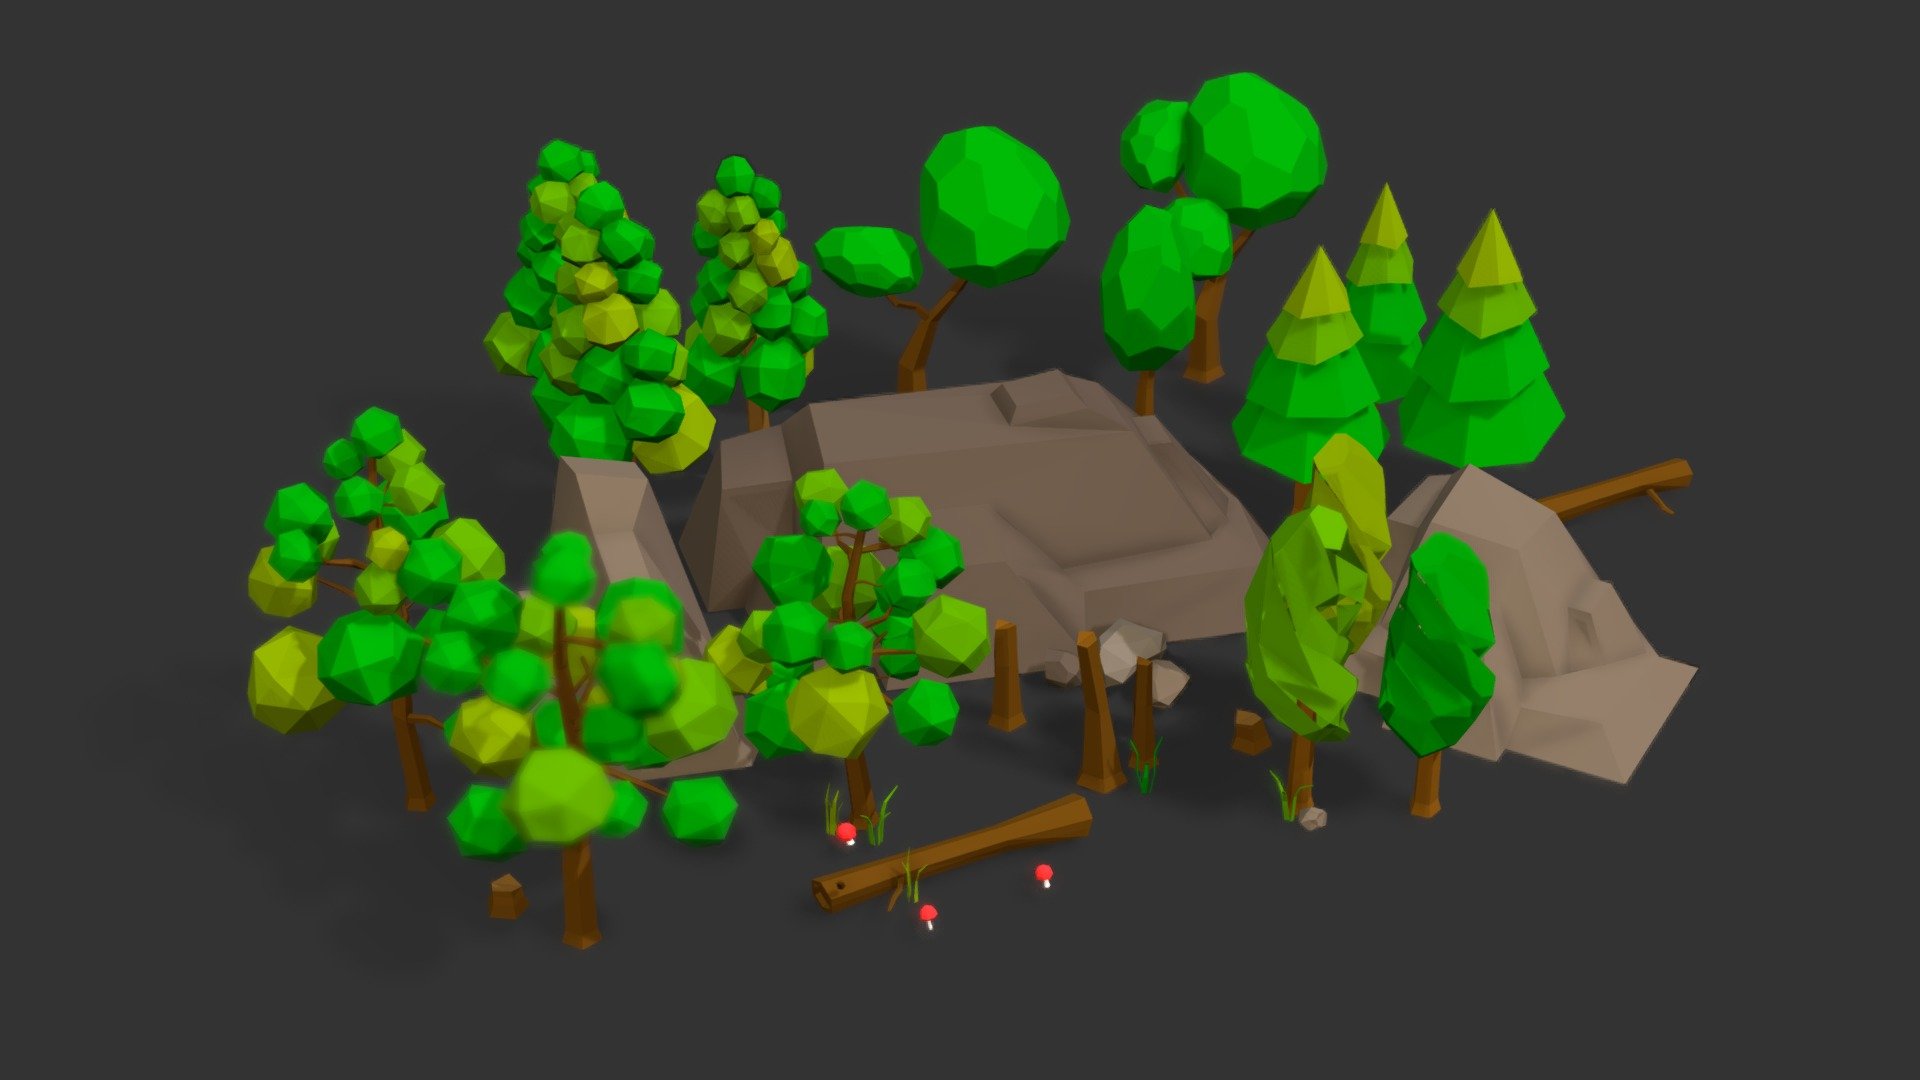 Lowpoly forest model I made for practice. 
You can download and use the model. 
Planing to continue making lowpoly game models.

If you use this, feel free to show me your work on social media.
https://www.instagram.com/ertugrulorl/

https://twitter.com/ertugruloral3D - Lowpoly Forest - Download Free 3D model by Ertugrul Oral (@ertugrul.orl) 3d model